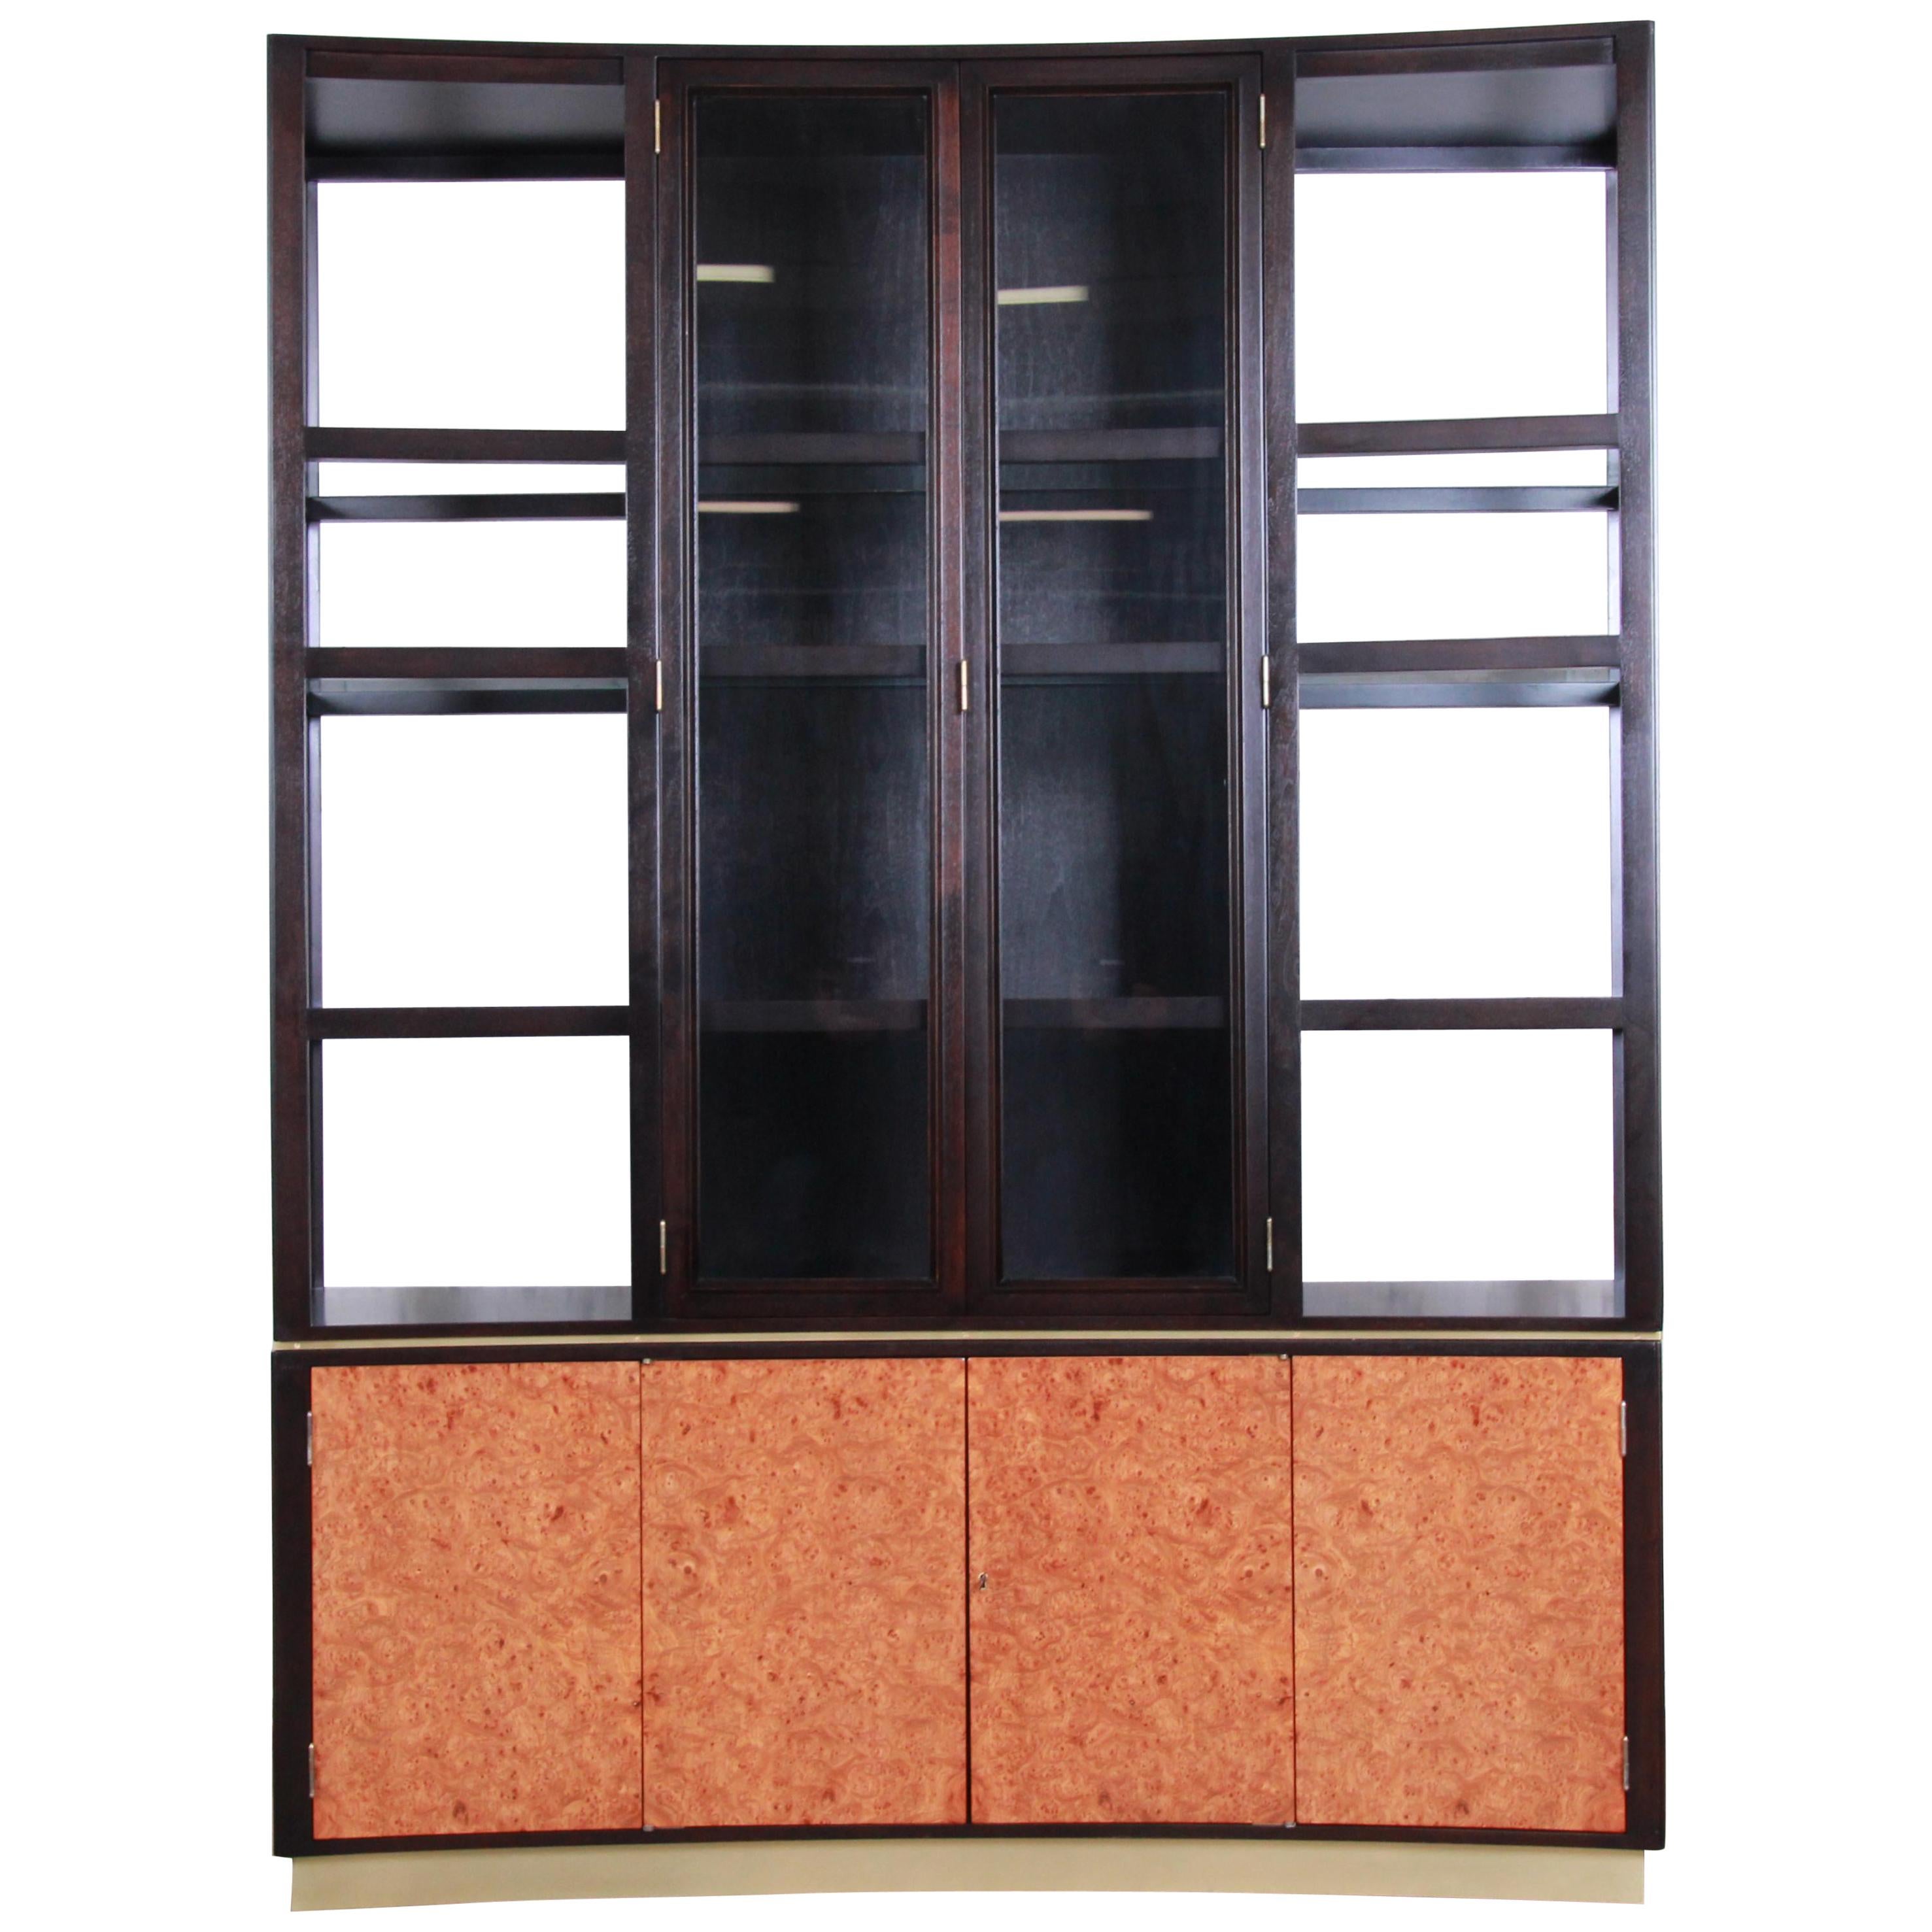 Edward Wormley for Dunbar Superstructure Wall Unit or Room Divider